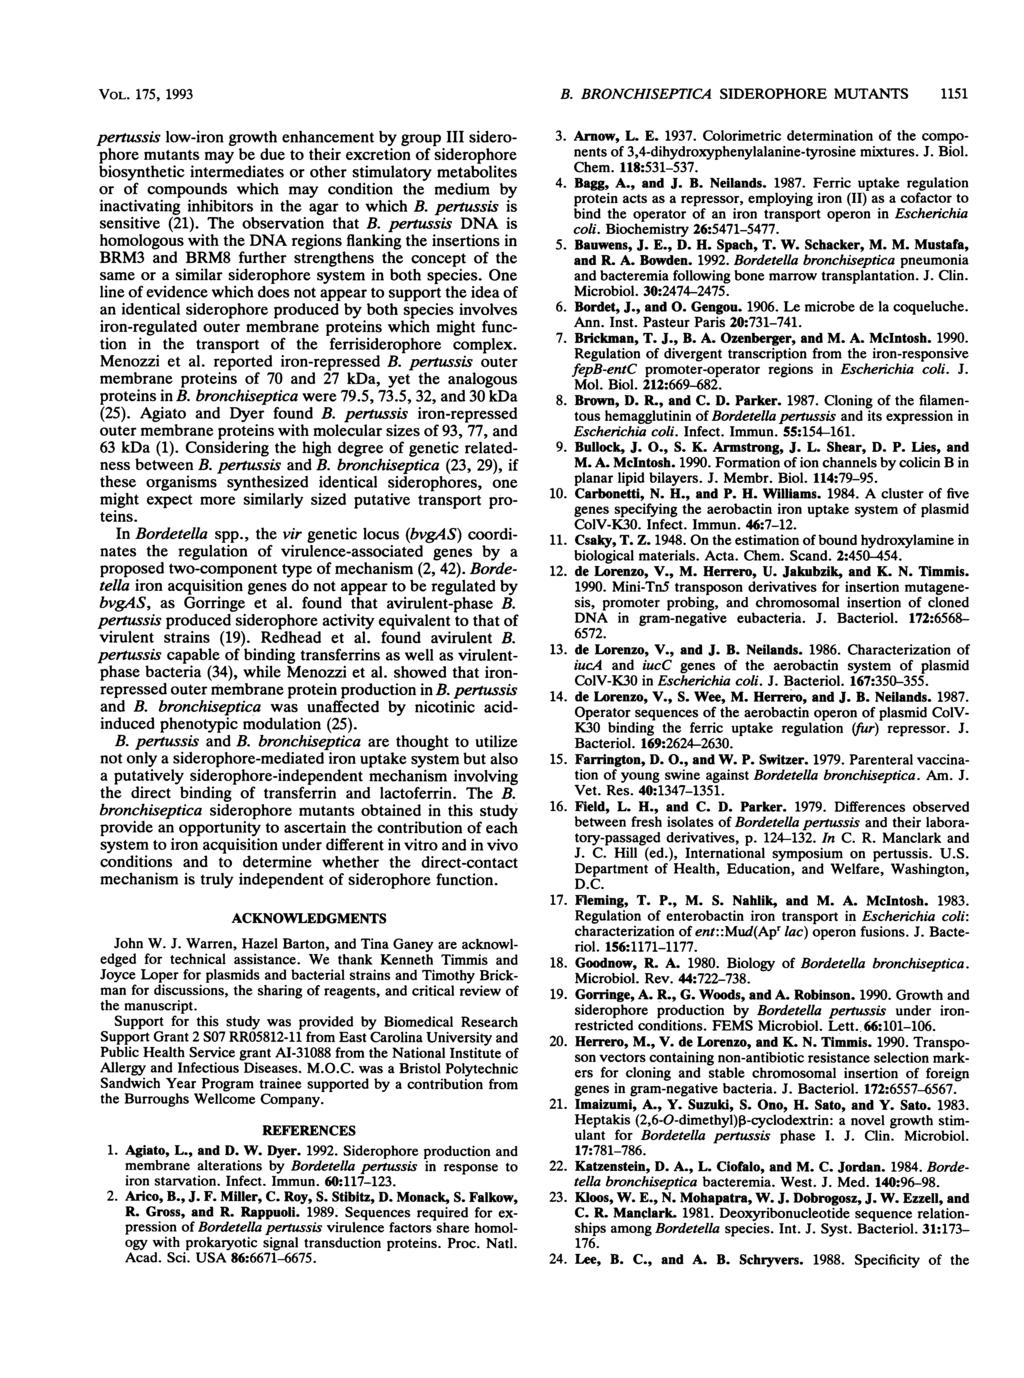 VOL. 175, 1993 pertussis low-iron growth enhancement by group III siderophore mutants may be due to their excretion of siderophore biosynthetic intermediates or other stimulatory metabolites or of